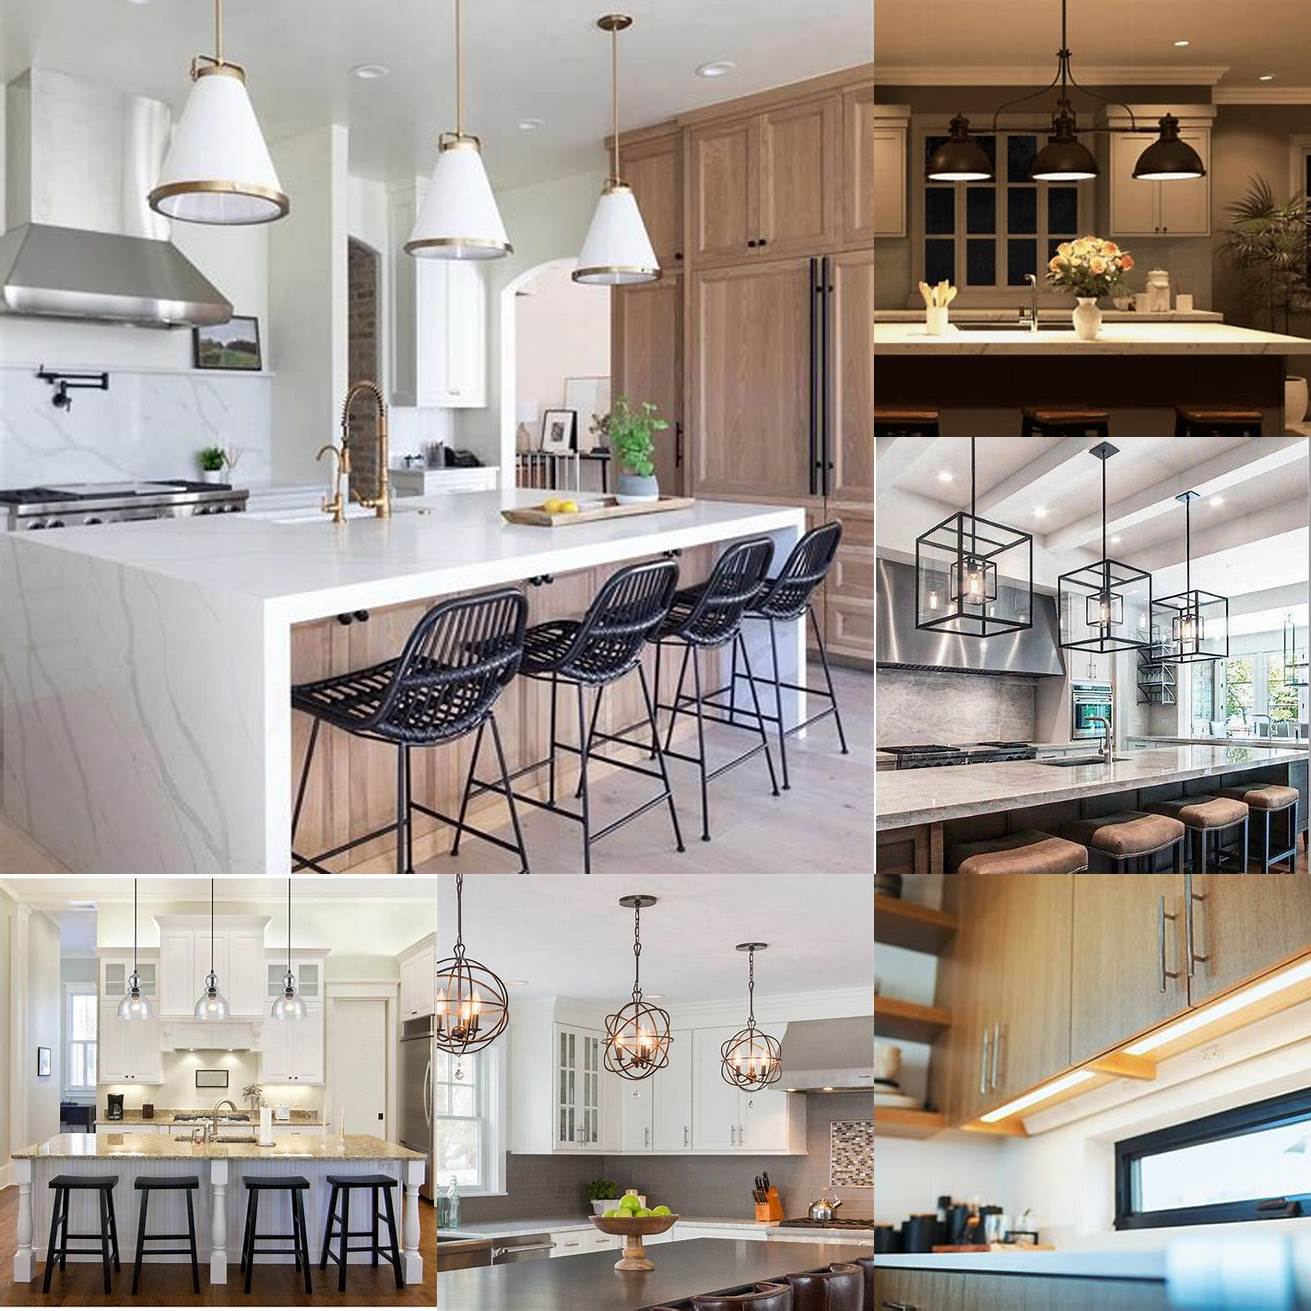 1 Choose lighting that is both functional and stylish Consider adding task lighting under cabinets or a statement pendant light over your island